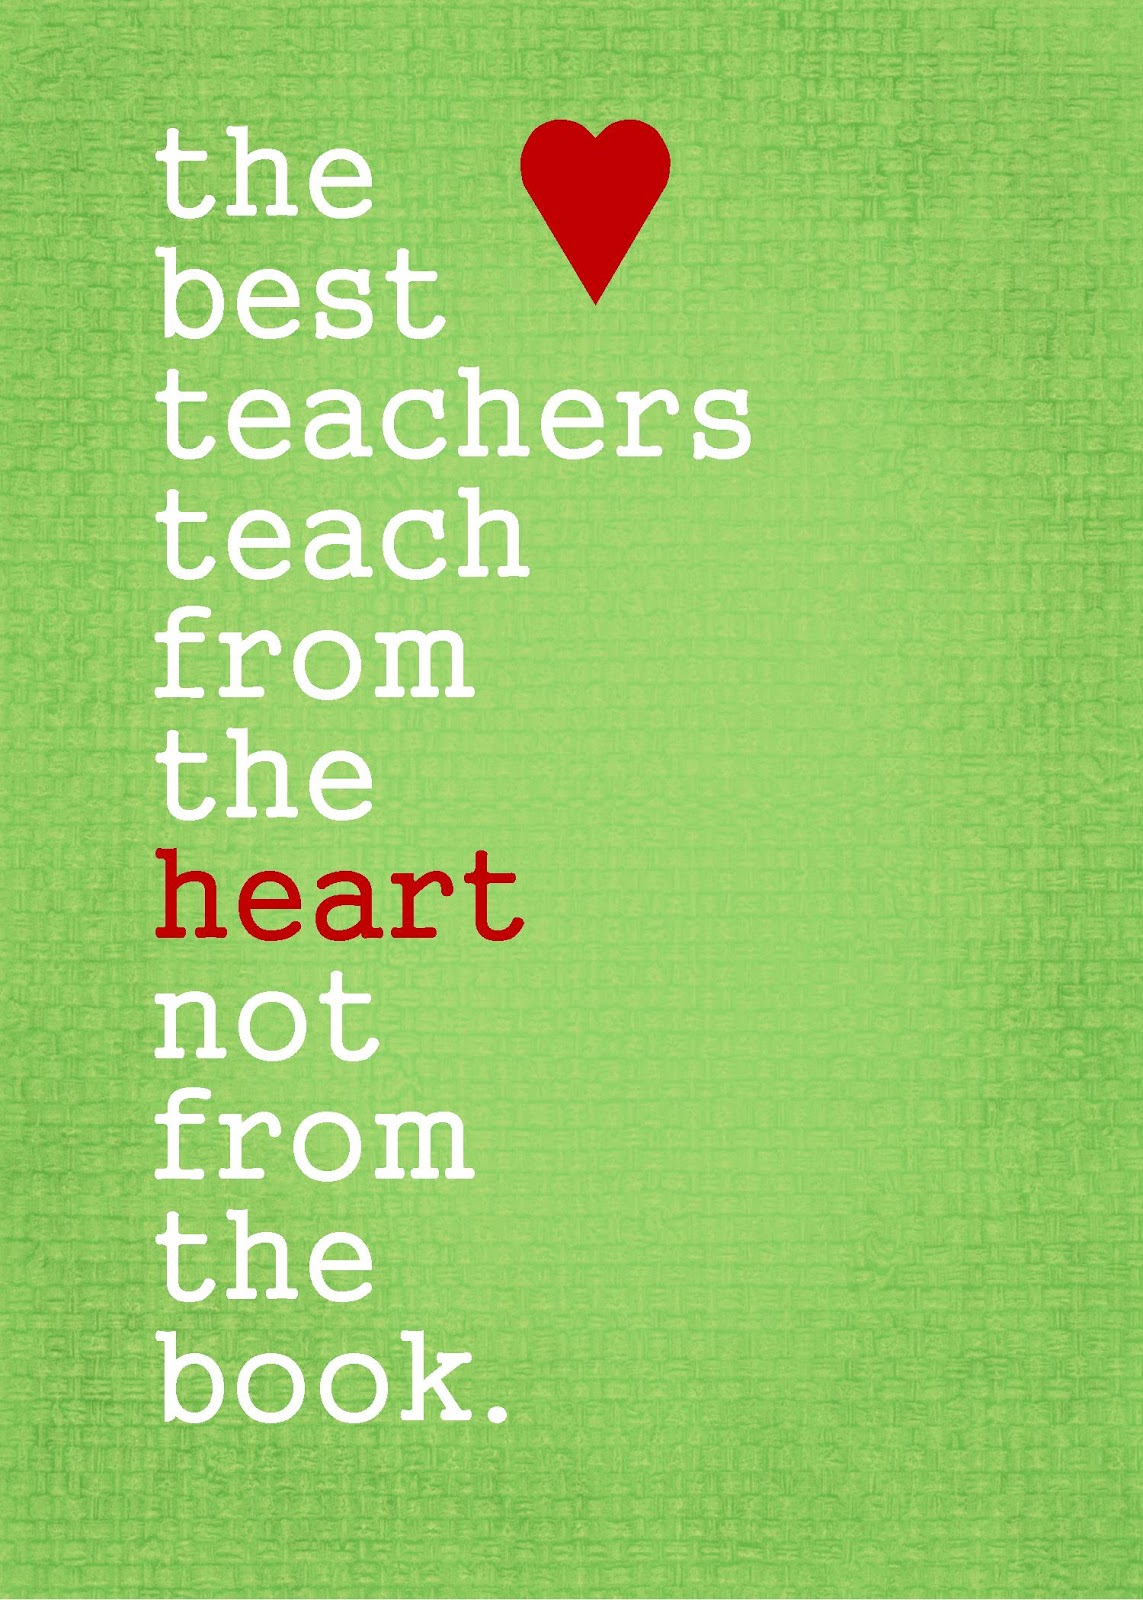 Full of Great Ideas: Teacher Gifts - Free printable quotes and